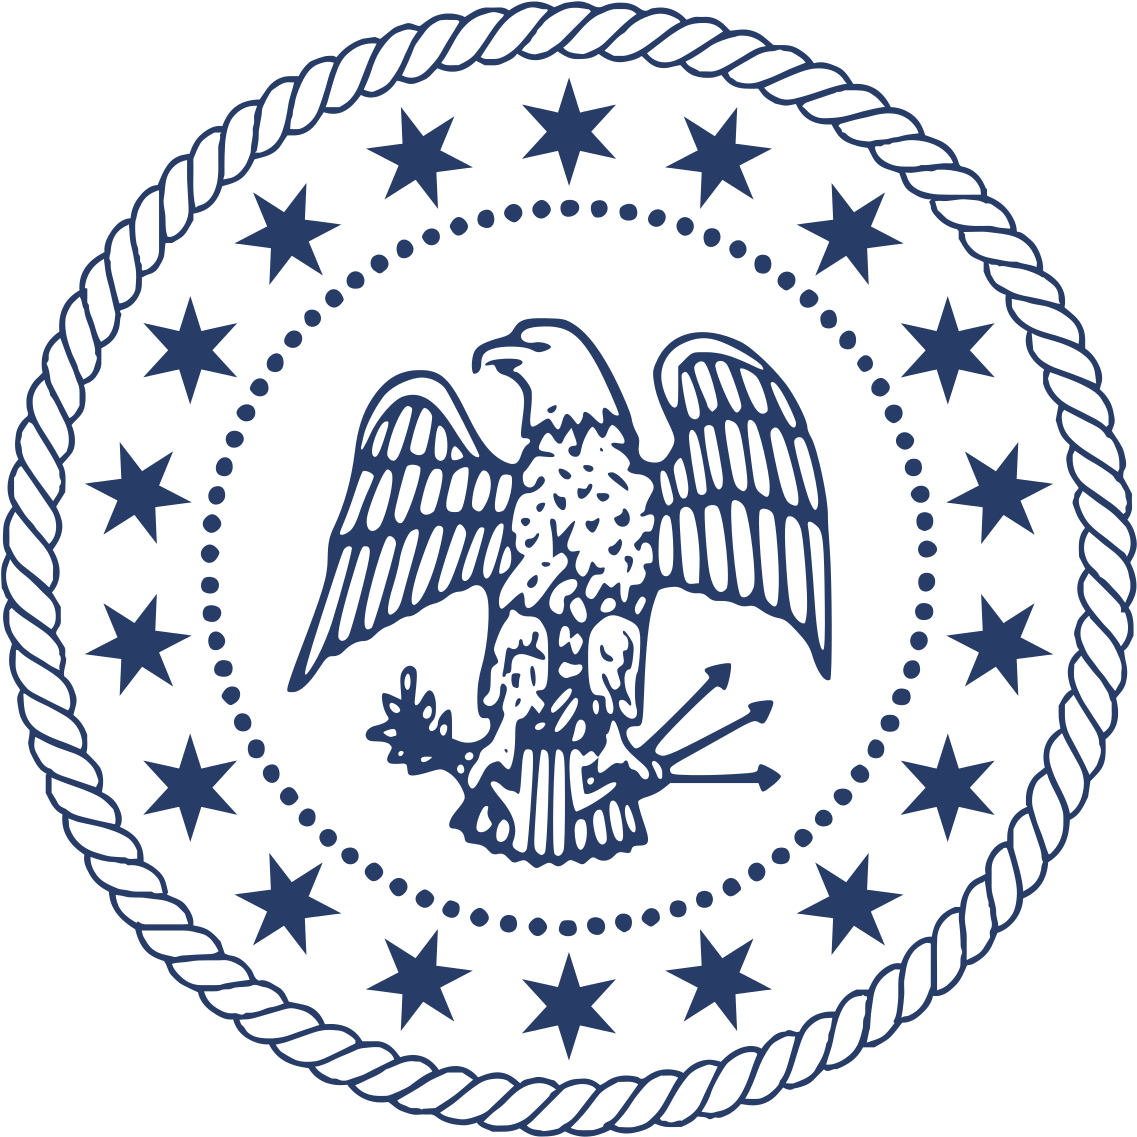 Eagleand Stars Seal PNG image